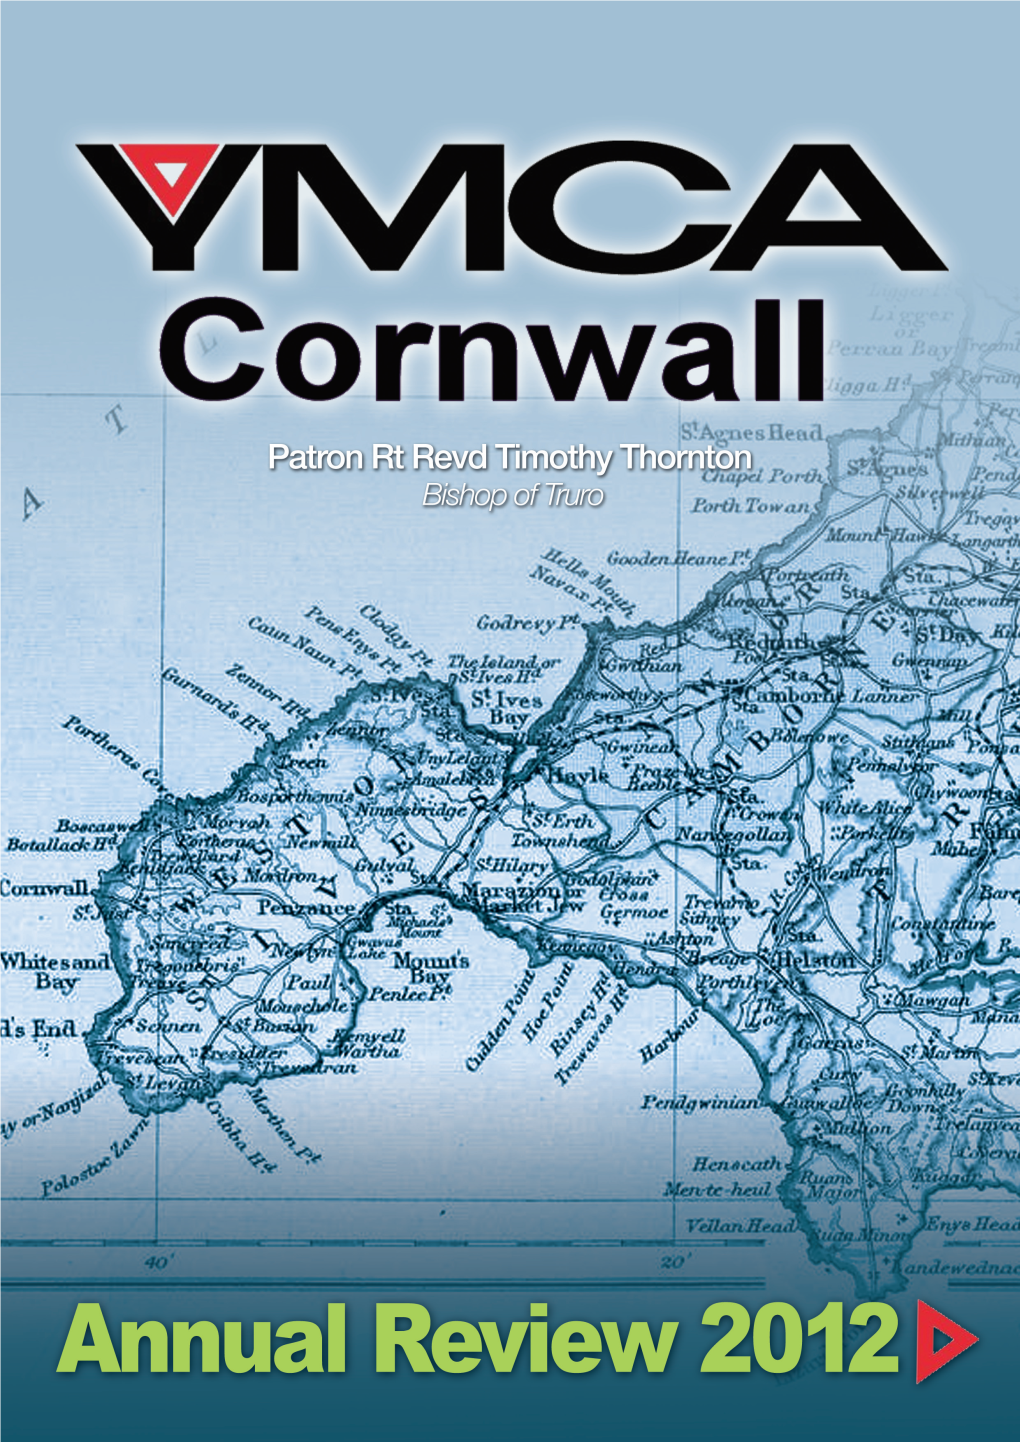 By David Hall-Davies Chief Executive Officer of YMCA Cornwall